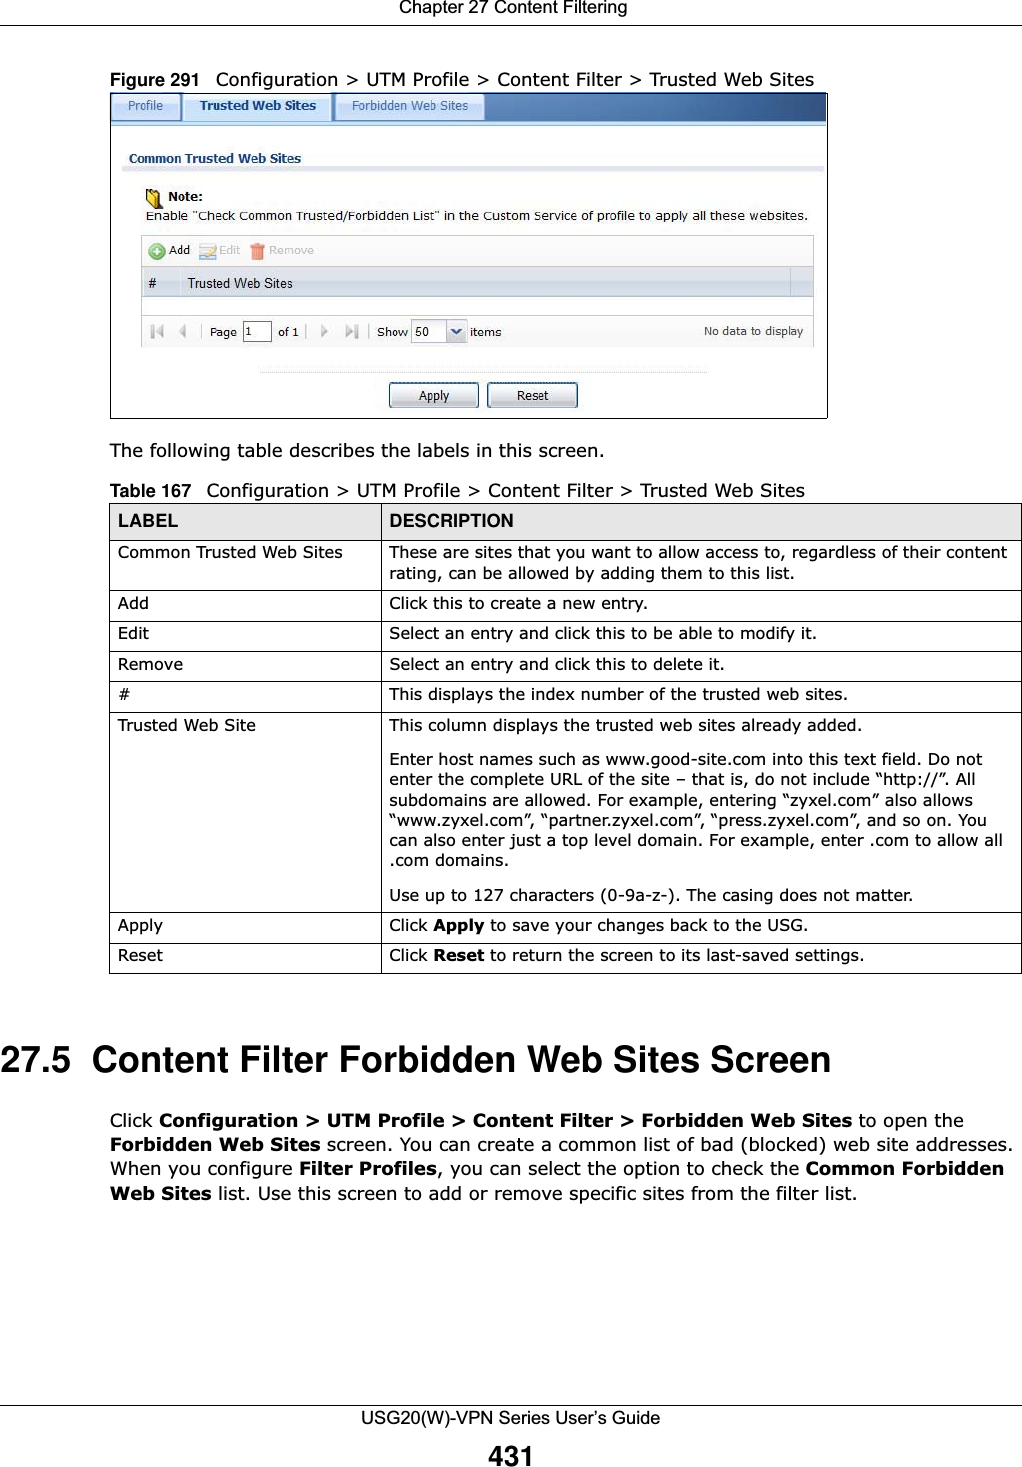  Chapter 27 Content FilteringUSG20(W)-VPN Series User’s Guide431Figure 291   Configuration &gt; UTM Profile &gt; Content Filter &gt; Trusted Web Sites The following table describes the labels in this screen.  27.5  Content Filter Forbidden Web Sites Screen Click Configuration &gt; UTM Profile &gt; Content Filter &gt; Forbidden Web Sites to open the Forbidden Web Sites screen. You can create a common list of bad (blocked) web site addresses. When you configure Filter Profiles, you can select the option to check the Common Forbidden Web Sites list. Use this screen to add or remove specific sites from the filter list.Table 167   Configuration &gt; UTM Profile &gt; Content Filter &gt; Trusted Web SitesLABEL DESCRIPTIONCommon Trusted Web Sites  These are sites that you want to allow access to, regardless of their content rating, can be allowed by adding them to this list. Add Click this to create a new entry. Edit Select an entry and click this to be able to modify it. Remove Select an entry and click this to delete it. # This displays the index number of the trusted web sites.Trusted Web Site This column displays the trusted web sites already added.Enter host names such as www.good-site.com into this text field. Do not enter the complete URL of the site – that is, do not include “http://”. All subdomains are allowed. For example, entering “zyxel.com” also allows “www.zyxel.com”, “partner.zyxel.com”, “press.zyxel.com”, and so on. You can also enter just a top level domain. For example, enter .com to allow all .com domains.Use up to 127 characters (0-9a-z-). The casing does not matter.Apply Click Apply to save your changes back to the USG.Reset Click Reset to return the screen to its last-saved settings. 